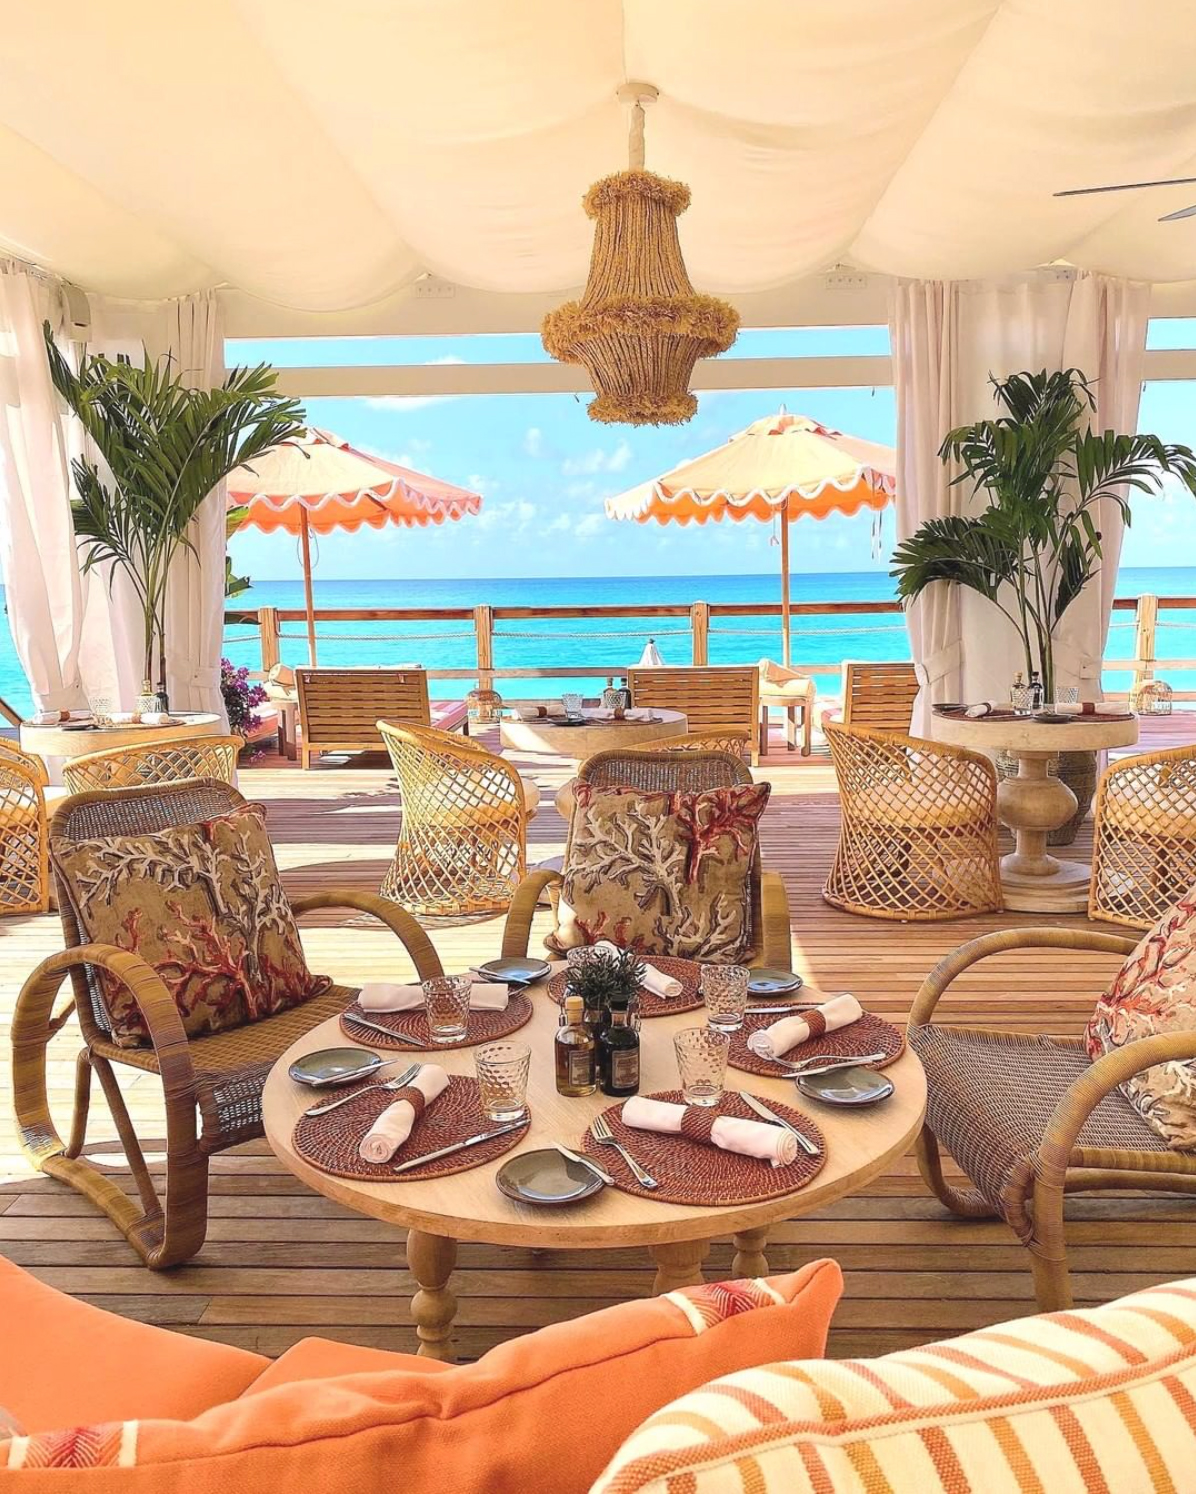 Image of restaurant with umbrellas in the background